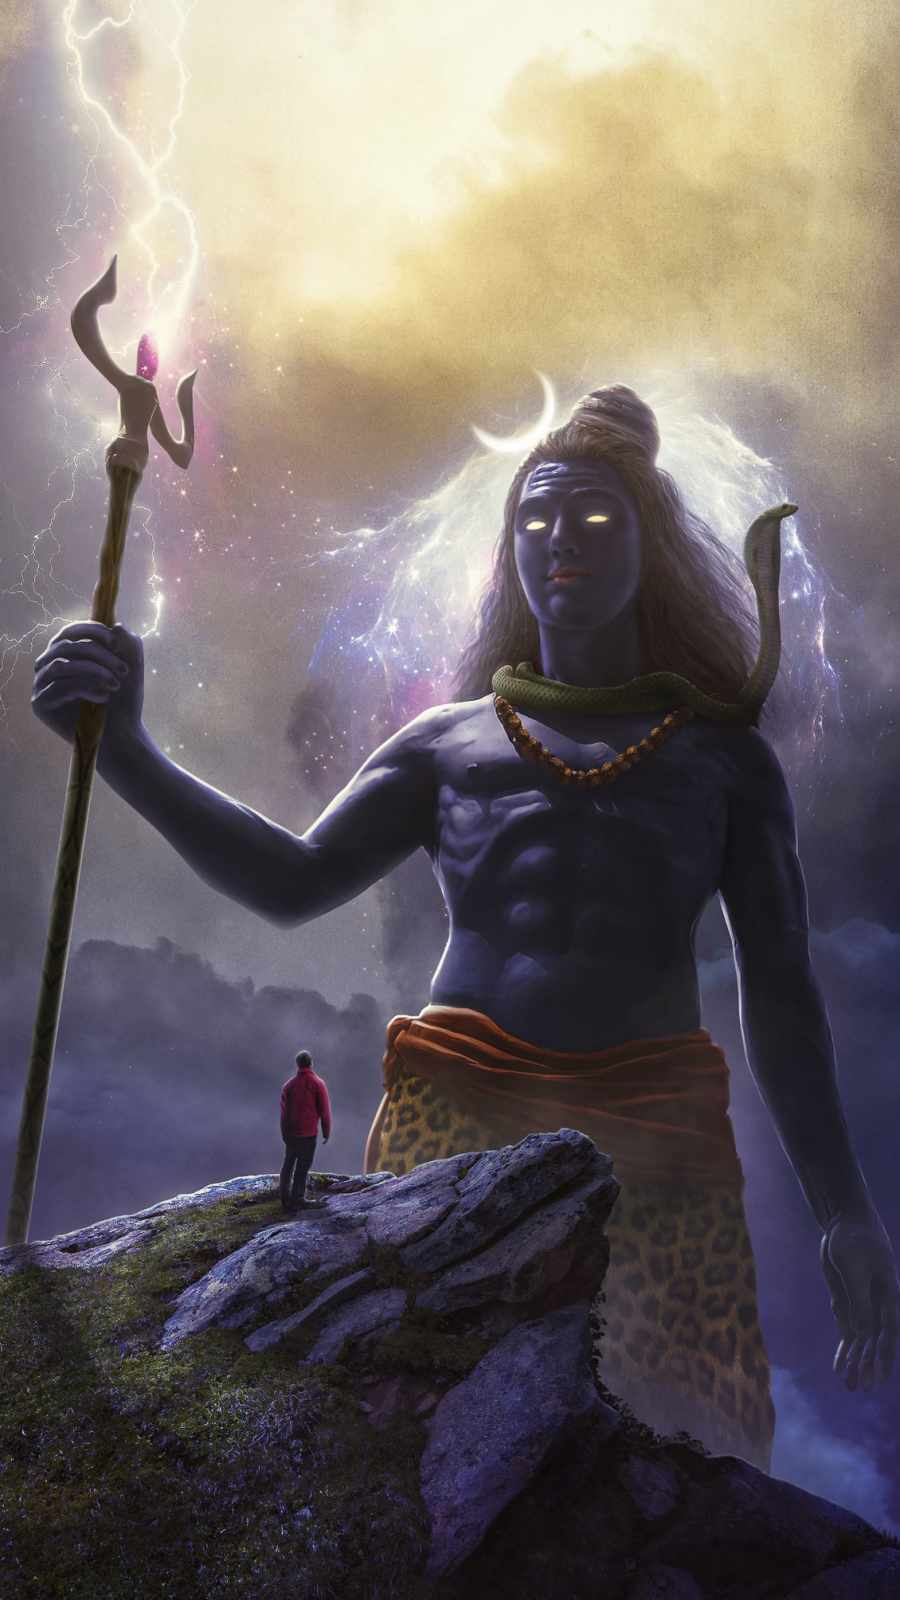 Shiva God IPhone Wallpaper - IPhone Wallpapers : iPhone Wallpapers